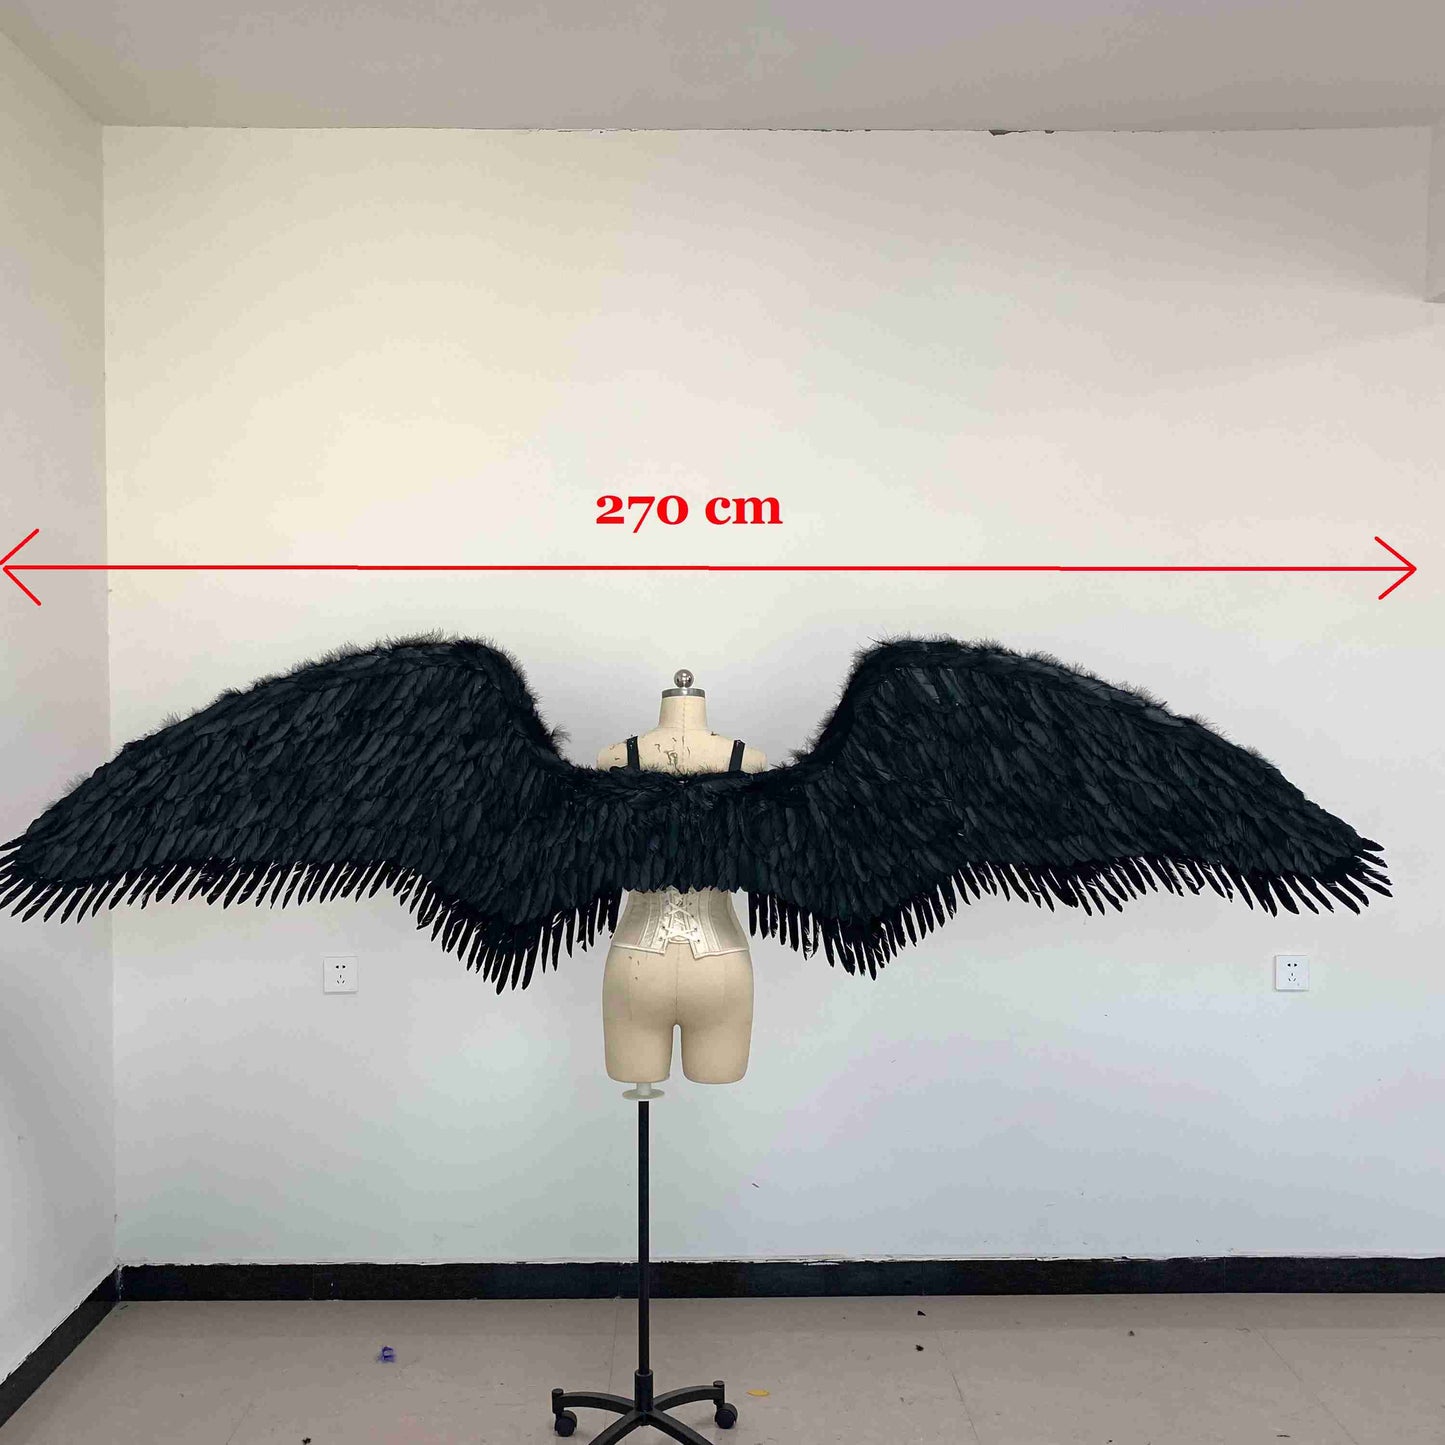 Our black fallen angel wings dimensions. Made from goose feathers. Wings for the devil or fallen angel costume. Suitable for photoshoots.